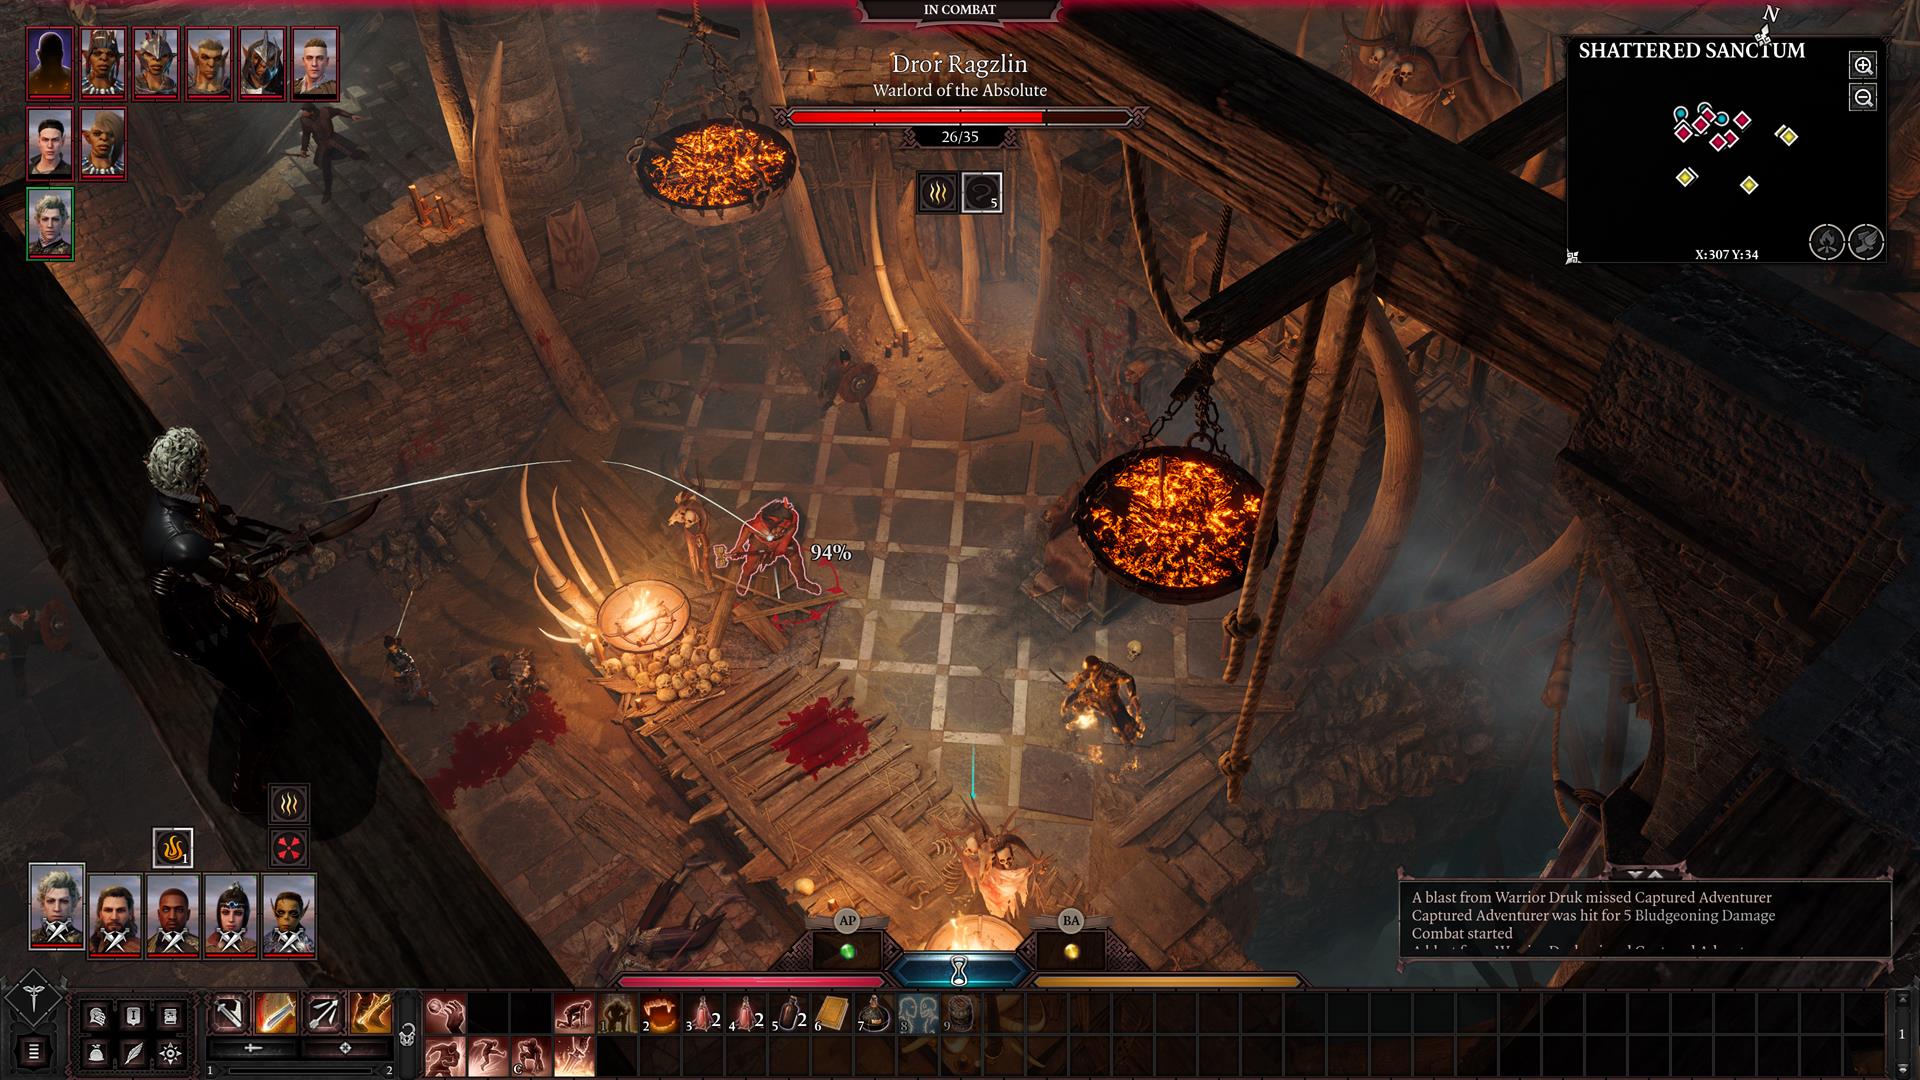 Image for You can play through Baldur's Gate 3 in turn-based mode from start to finish